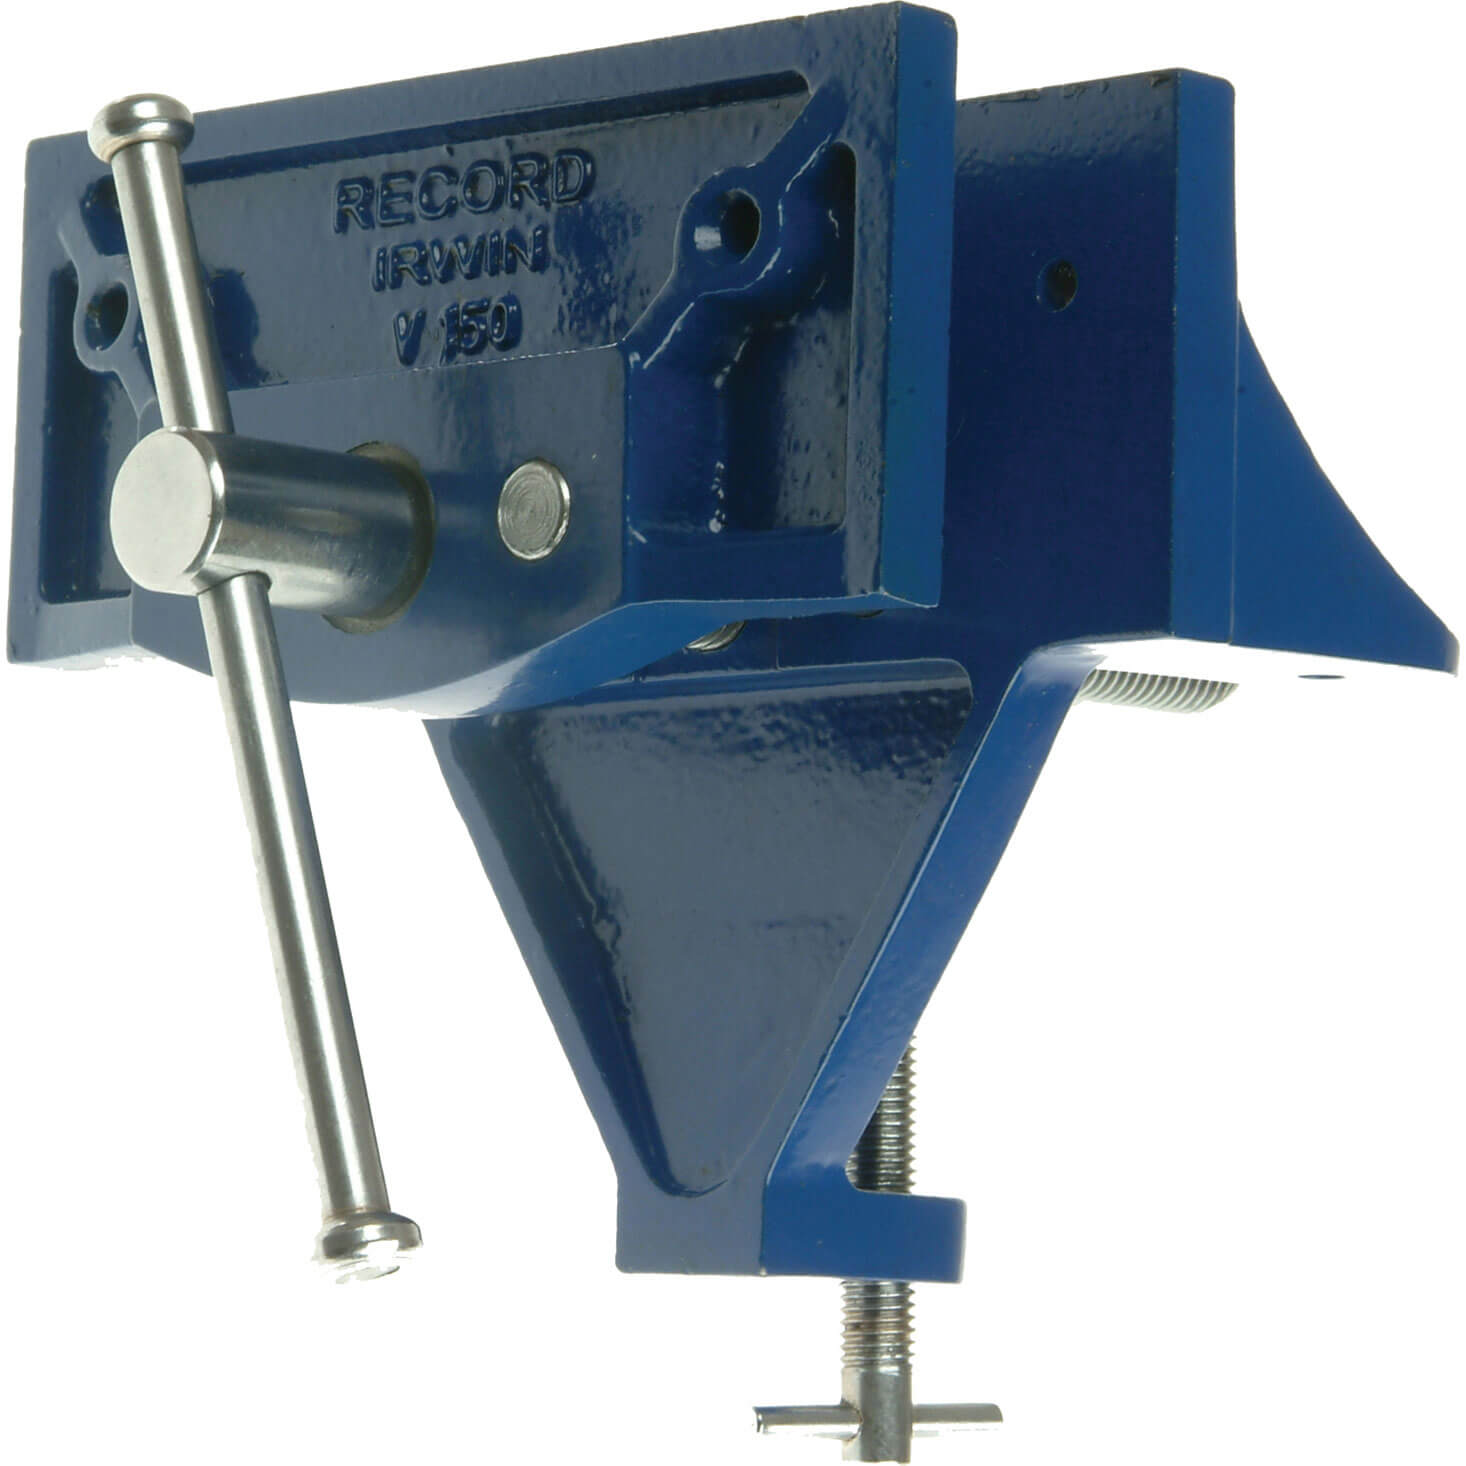 Image of Record V150B Clamp Mount Woodcraft Vice 150mm